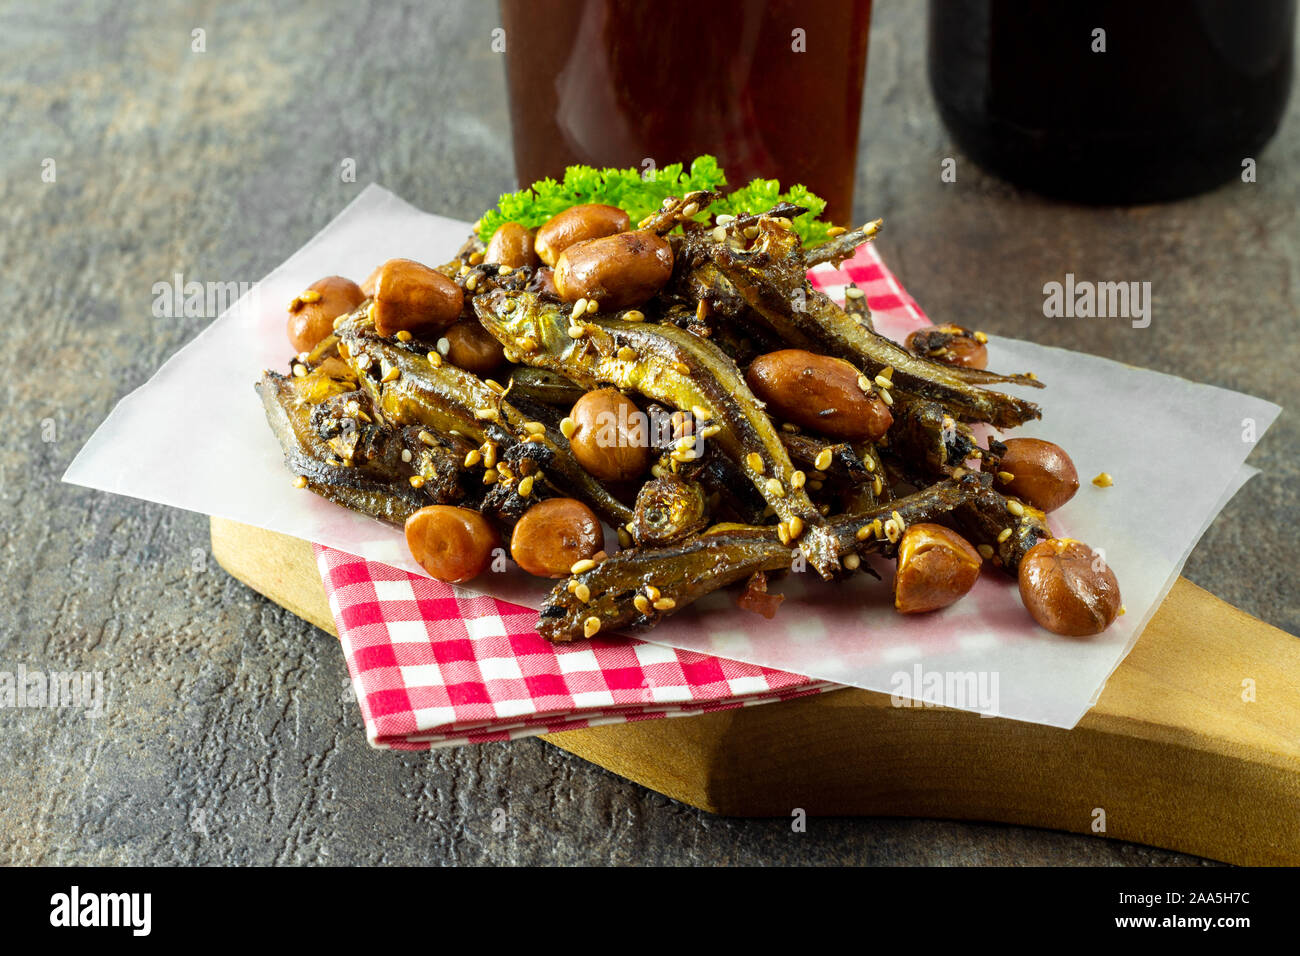 Tazukuri, candied sardines served with red beer. Dried sardines lightly coated with honey, roasted sesame and peanuts. Stock Photo